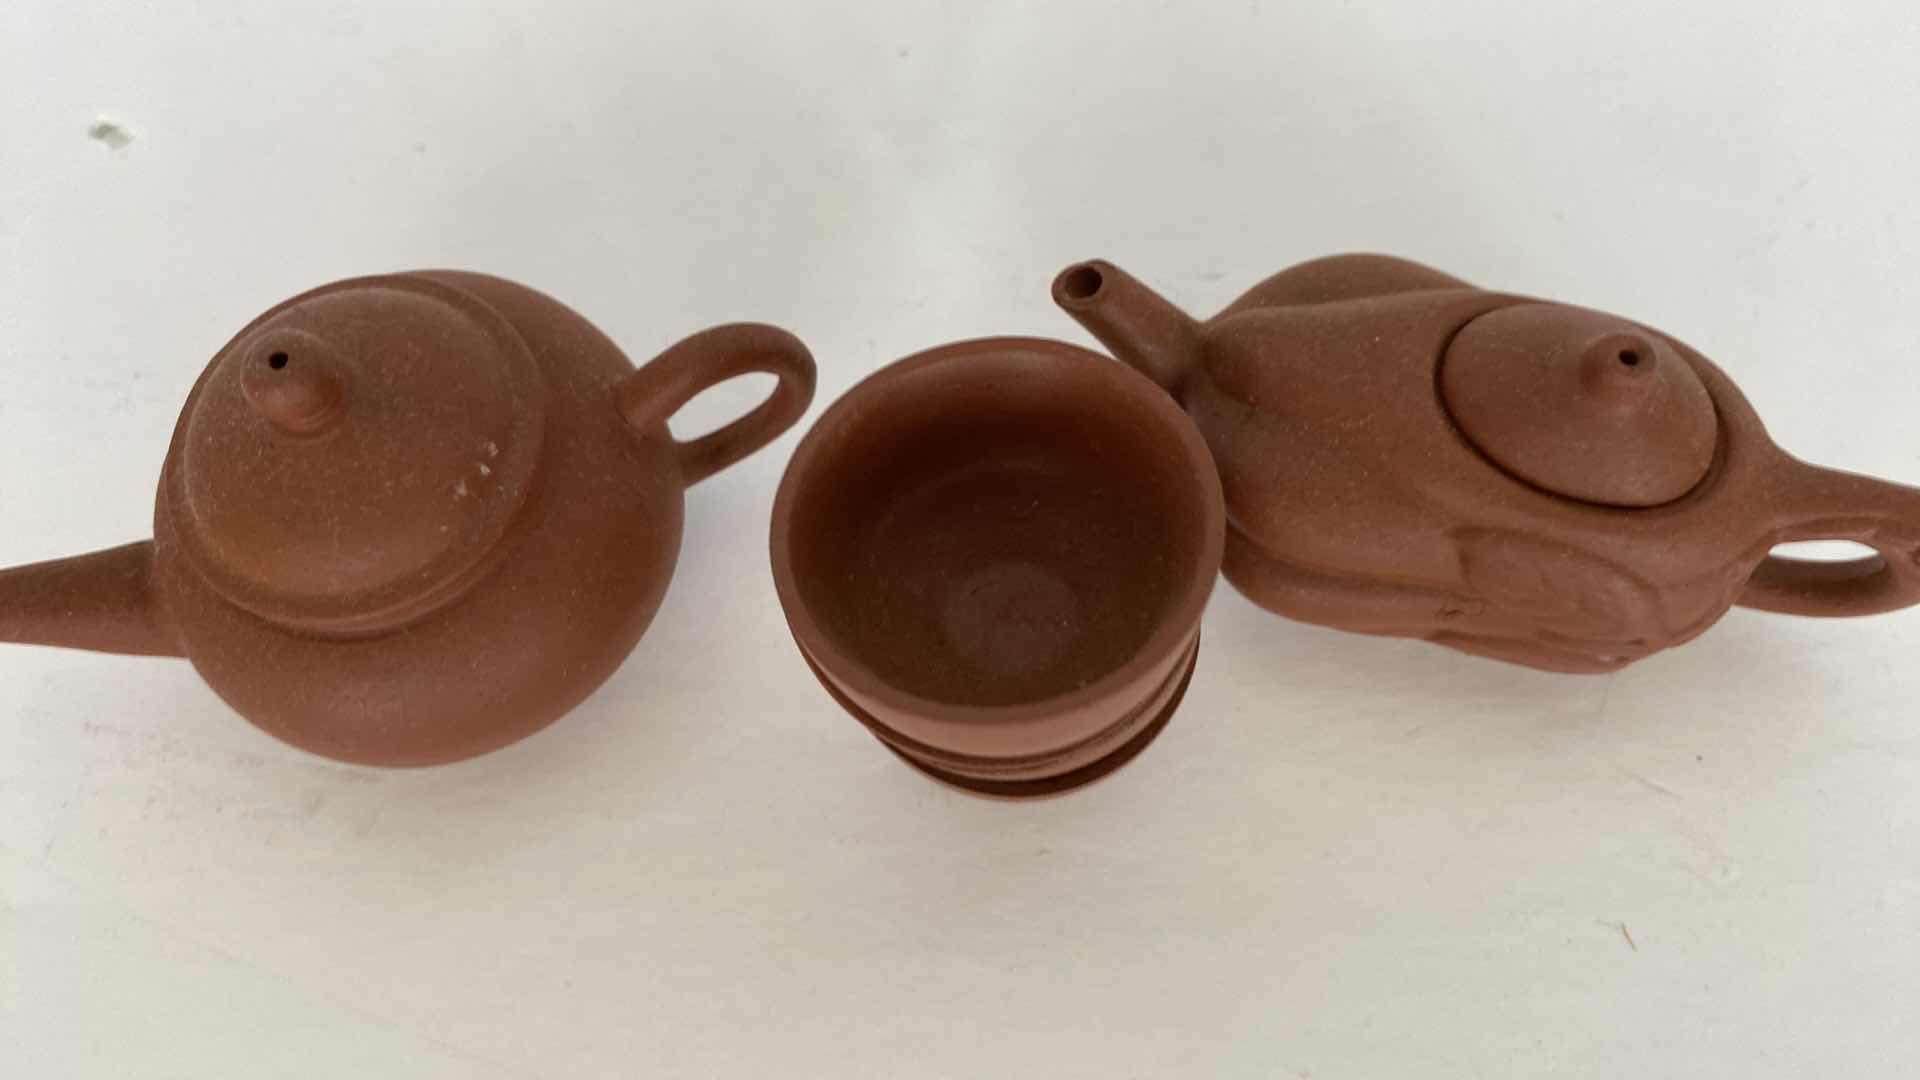 Photo 2 of PAIR OF VINTAGE CHINESE COLLECTIBLE CLAY TEA POTS WITH 4 TEA CUPS LARGEST TEAPOT 3” x 1 7/8”